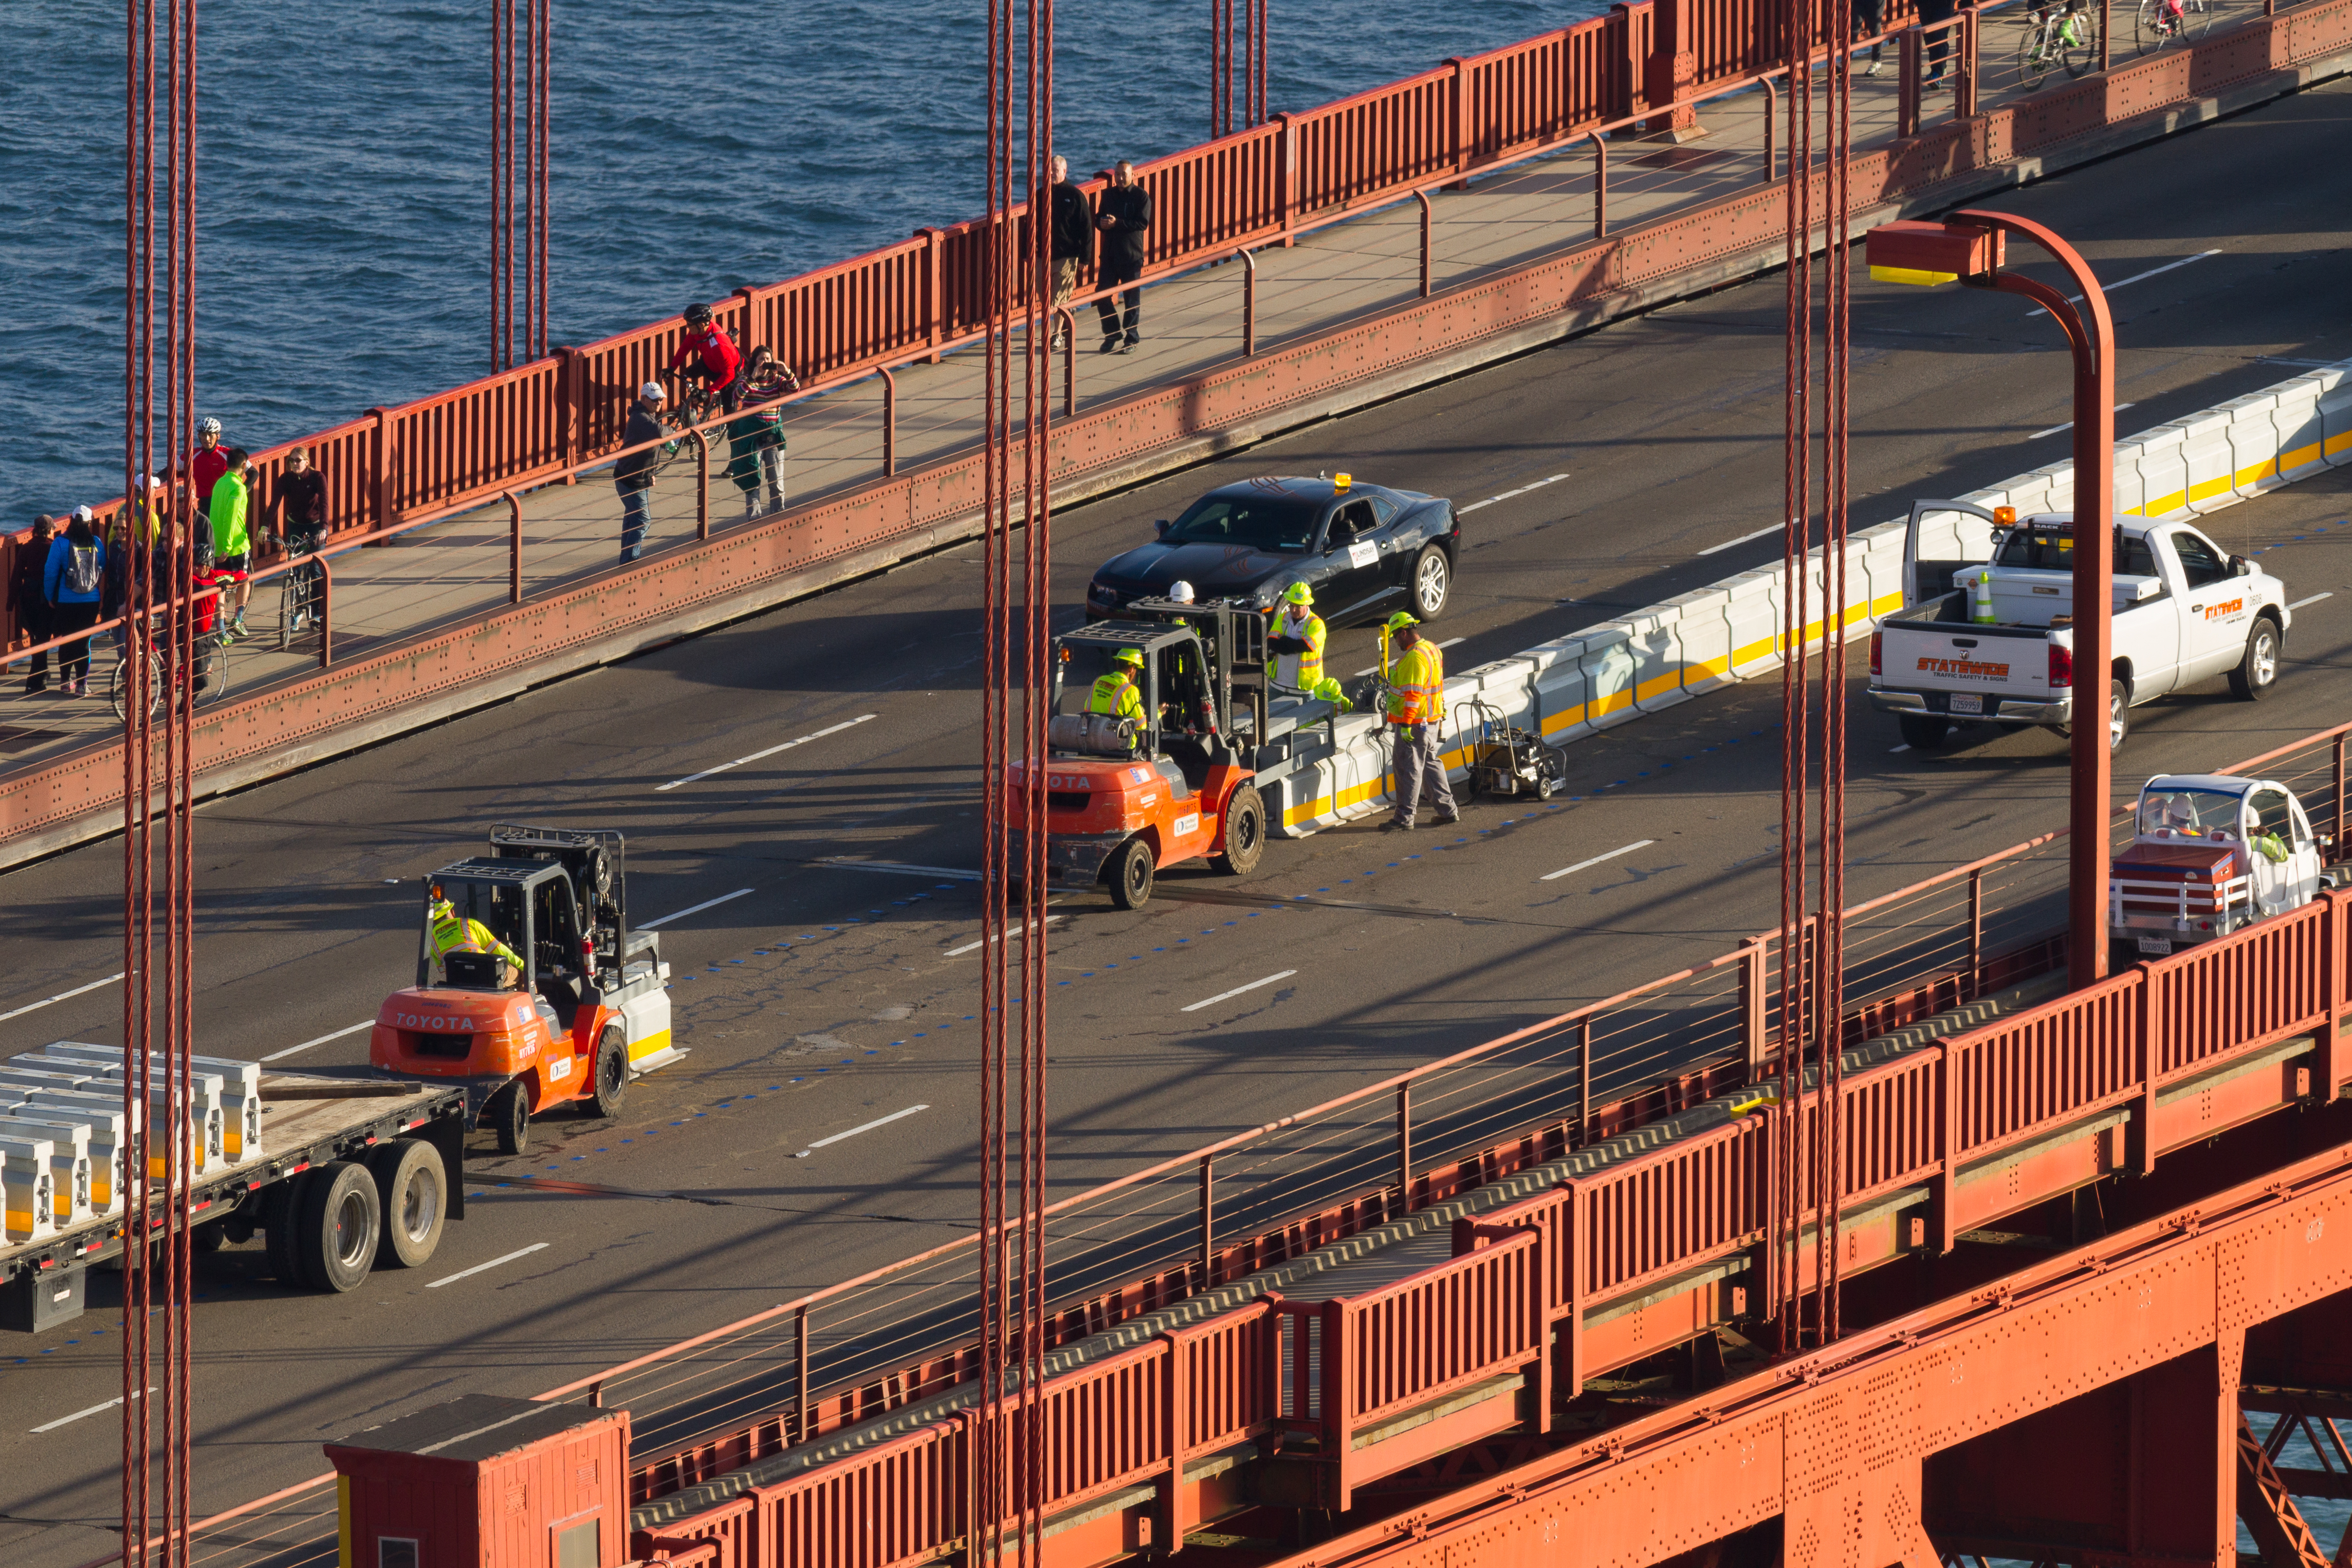 Installation of the Golden Gate Bridge Moveable Median Barrier System on January 10, 2015 -03